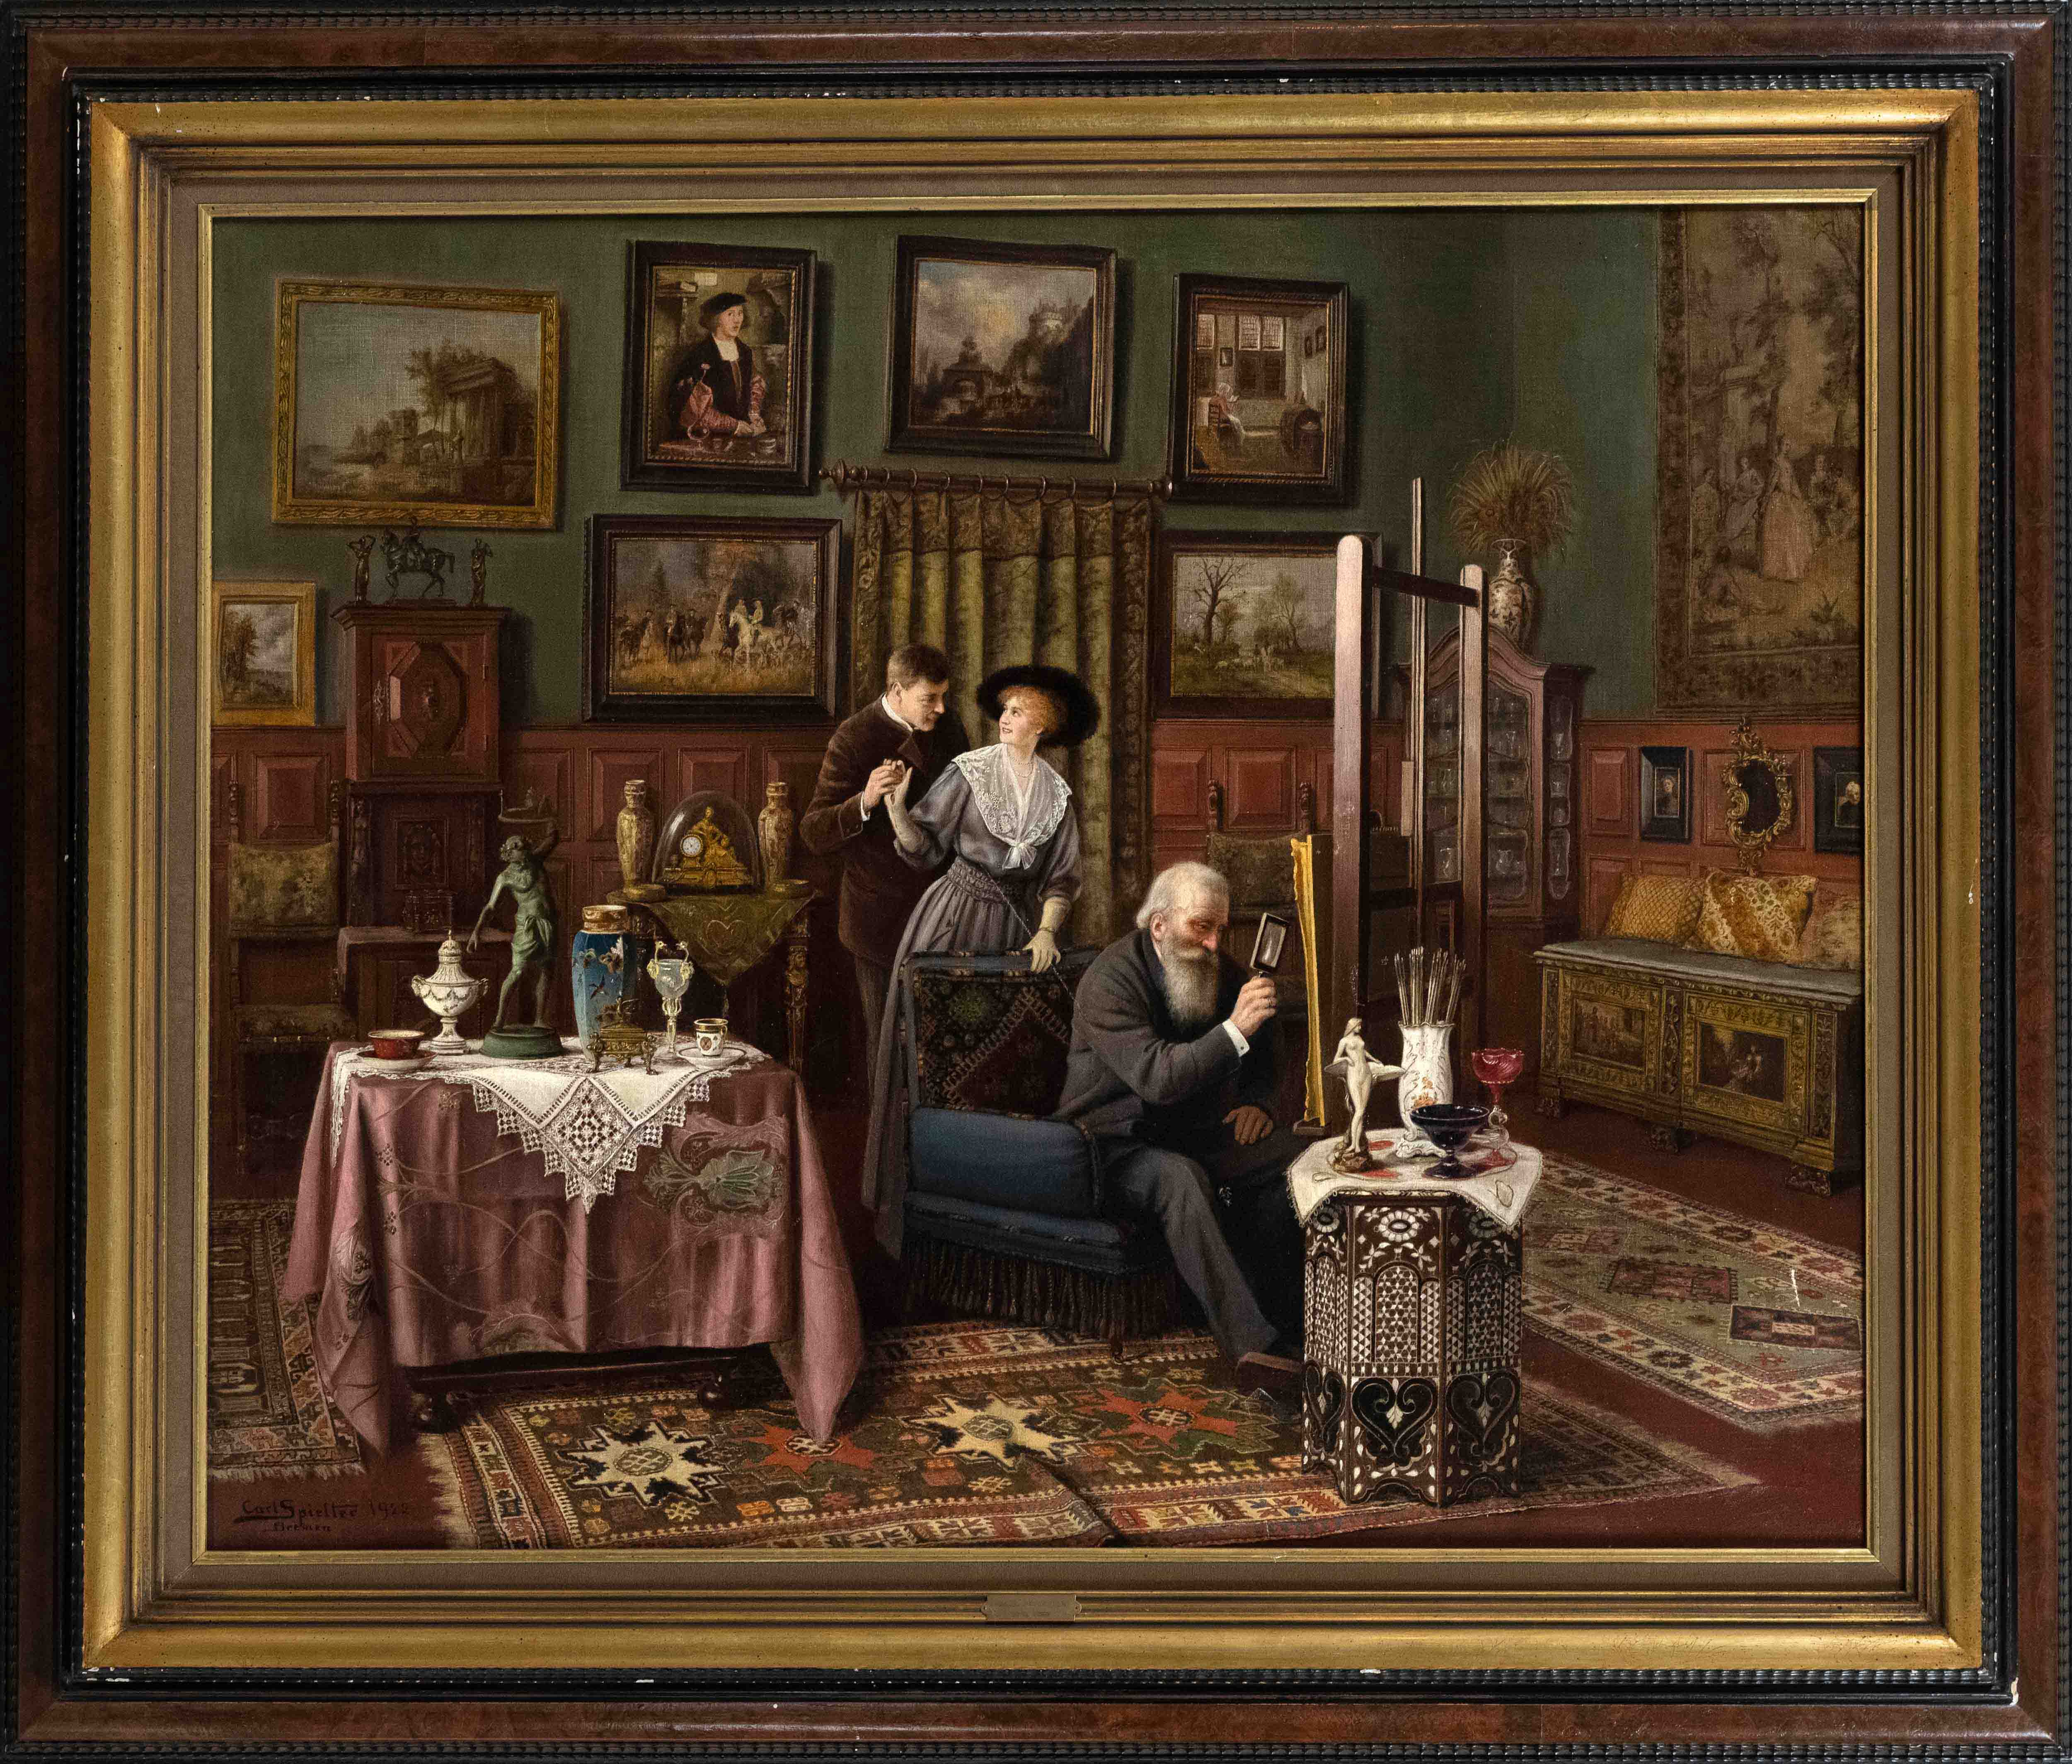 Carl Johann Spielter (1851-1922), Bremen genre painter, ''The Collector'', interior furnished with